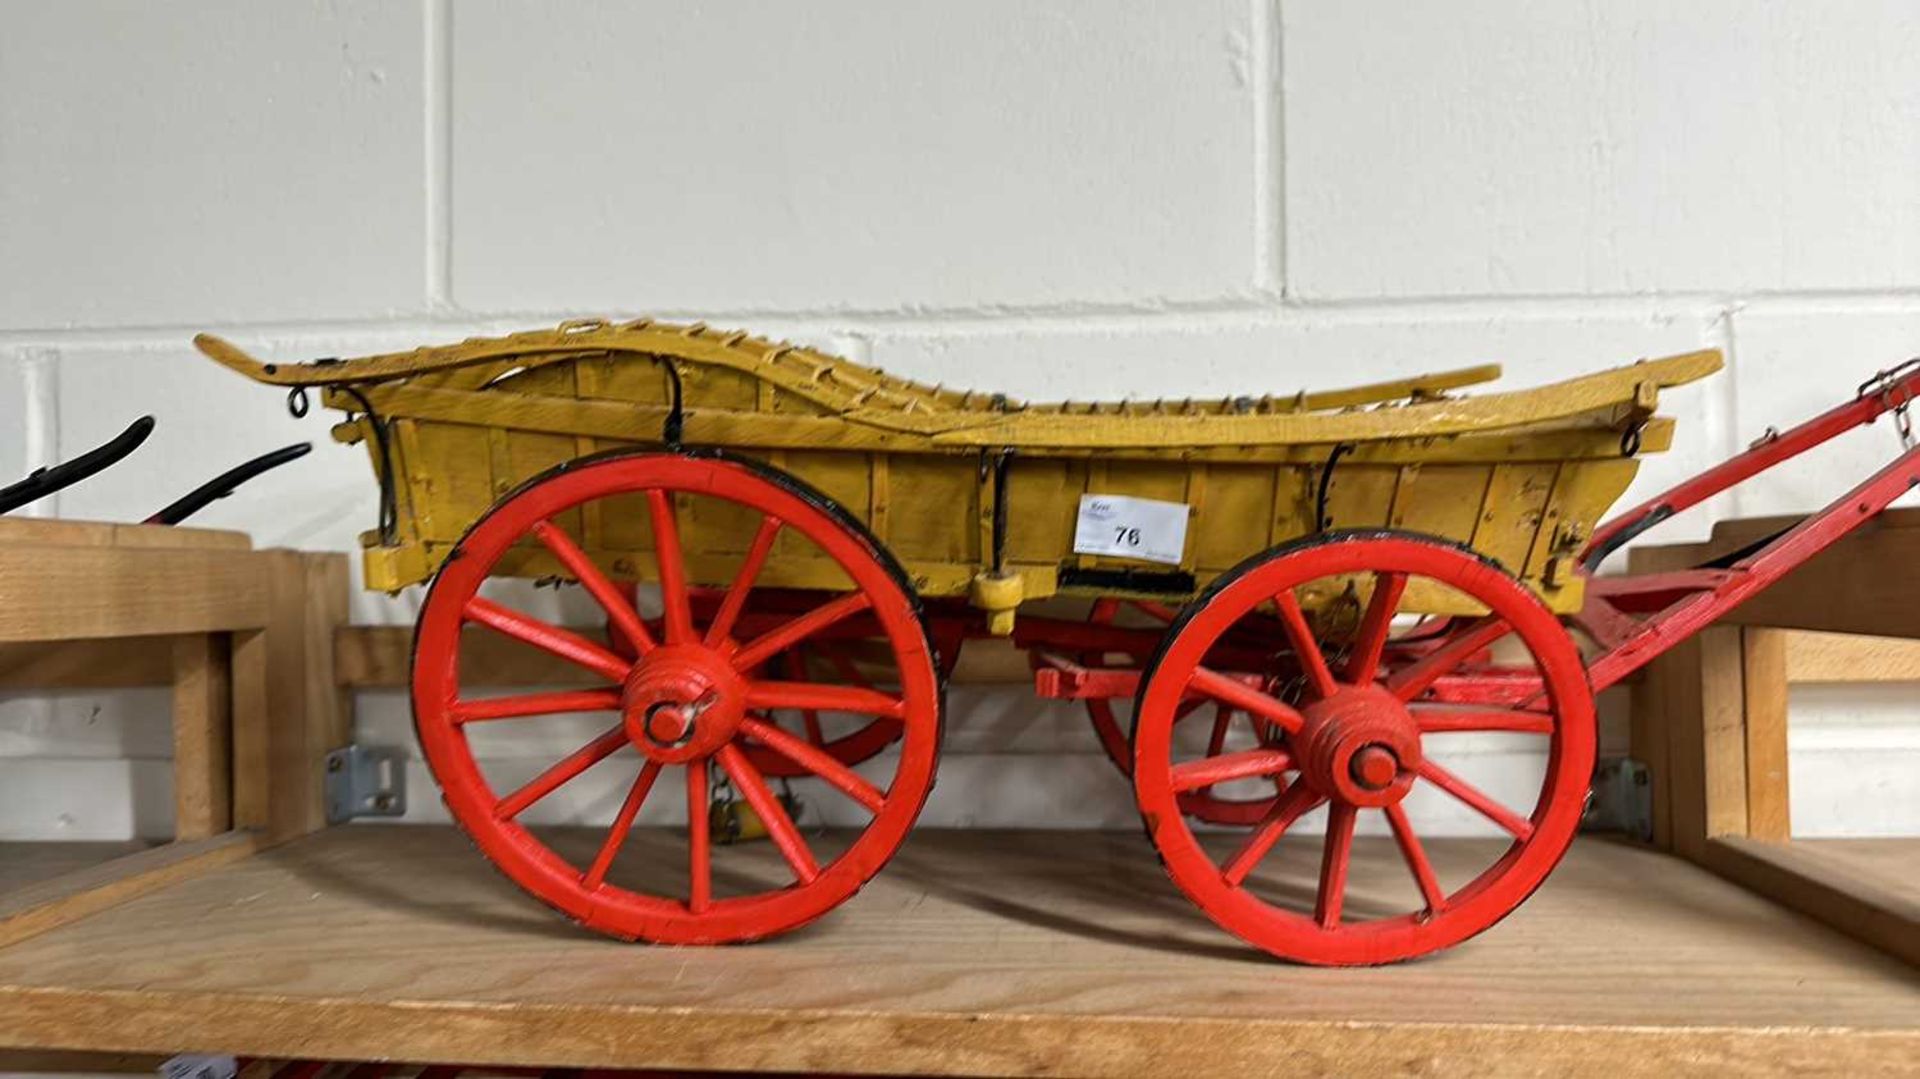 A scratch built model of an Oxford Wagon, painted in beige and red, approx 80cm long in total - Bild 3 aus 6